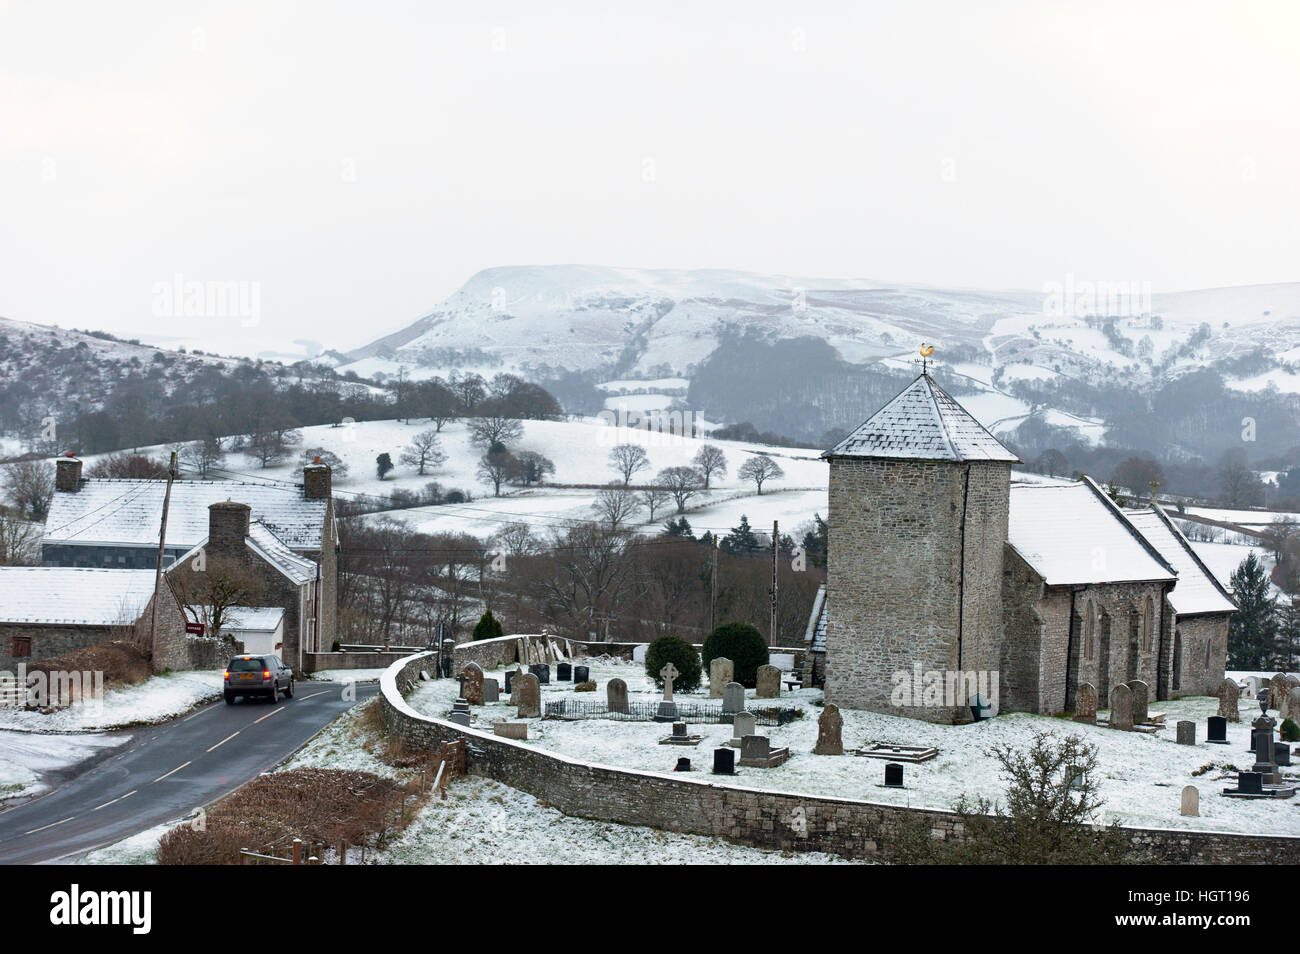 Llanddewi'r Cwm, Powys, Wales, UK. 13th January, 2017. St. David's Church in the tiny Welsh hamlet of Llanddewi'r Cwm, in Powys, UK. is surrounded by a wintry landscape © Graham M. Lawrence/Alamy Live News. Stock Photo